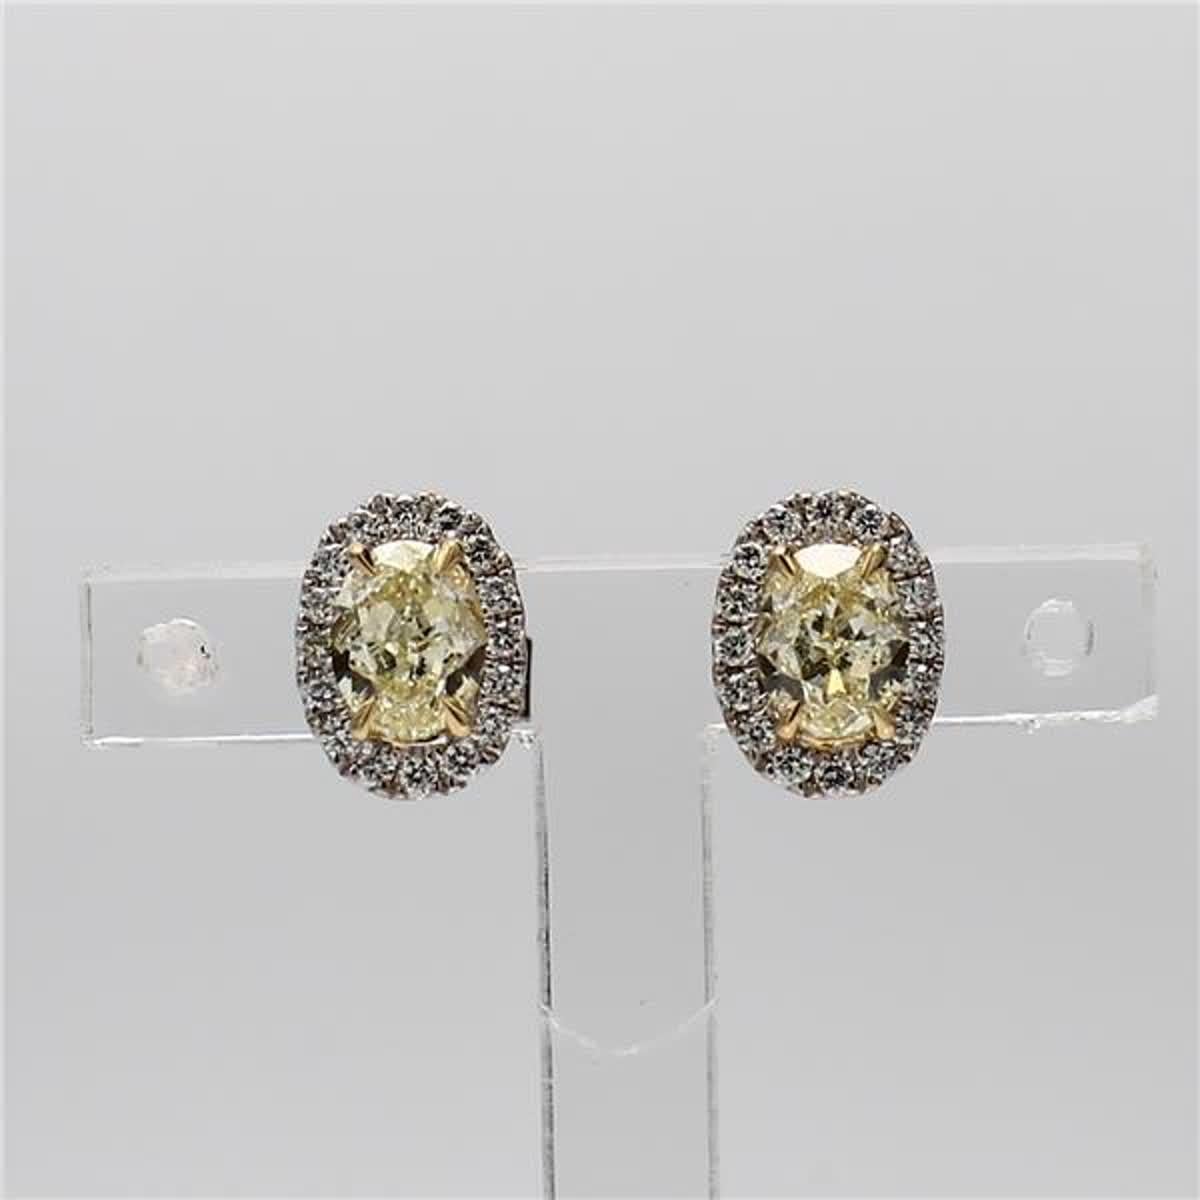 .53cts rare oval natural yellow and white diamond earrings. These earrings are designed to be placed in a simple setting with yellow ovals surrounded by white rounds in a beautiful single halo. Can be used as drop earrings or in addition to your